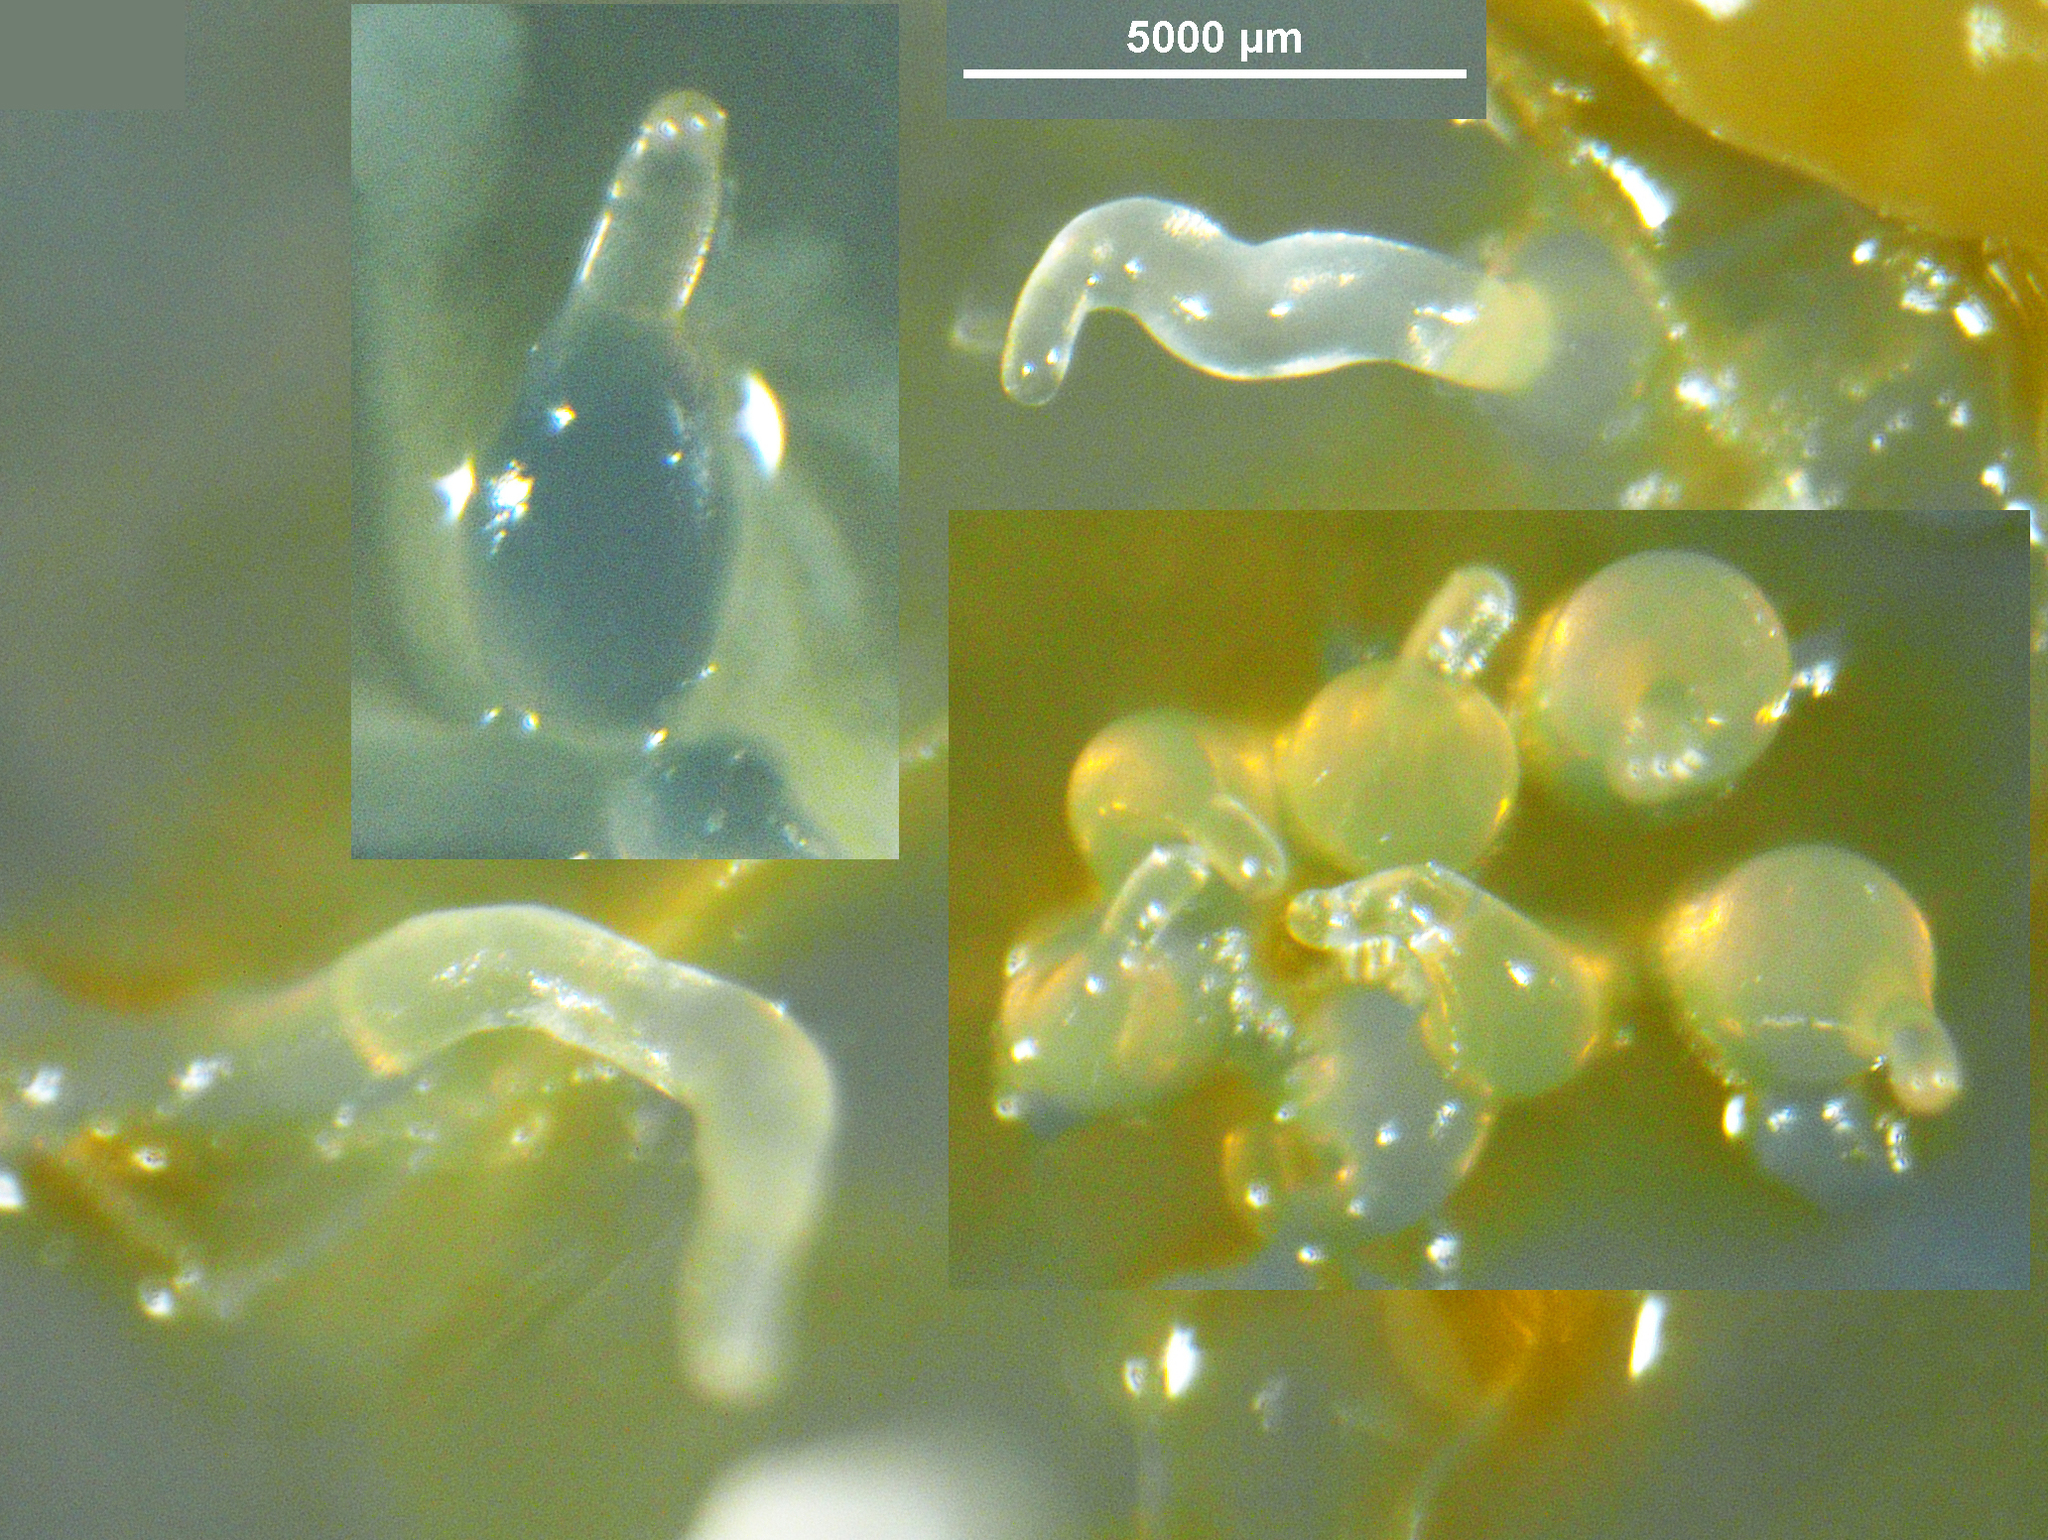 A collage of photos showing the culminating stages of Dictyostelium